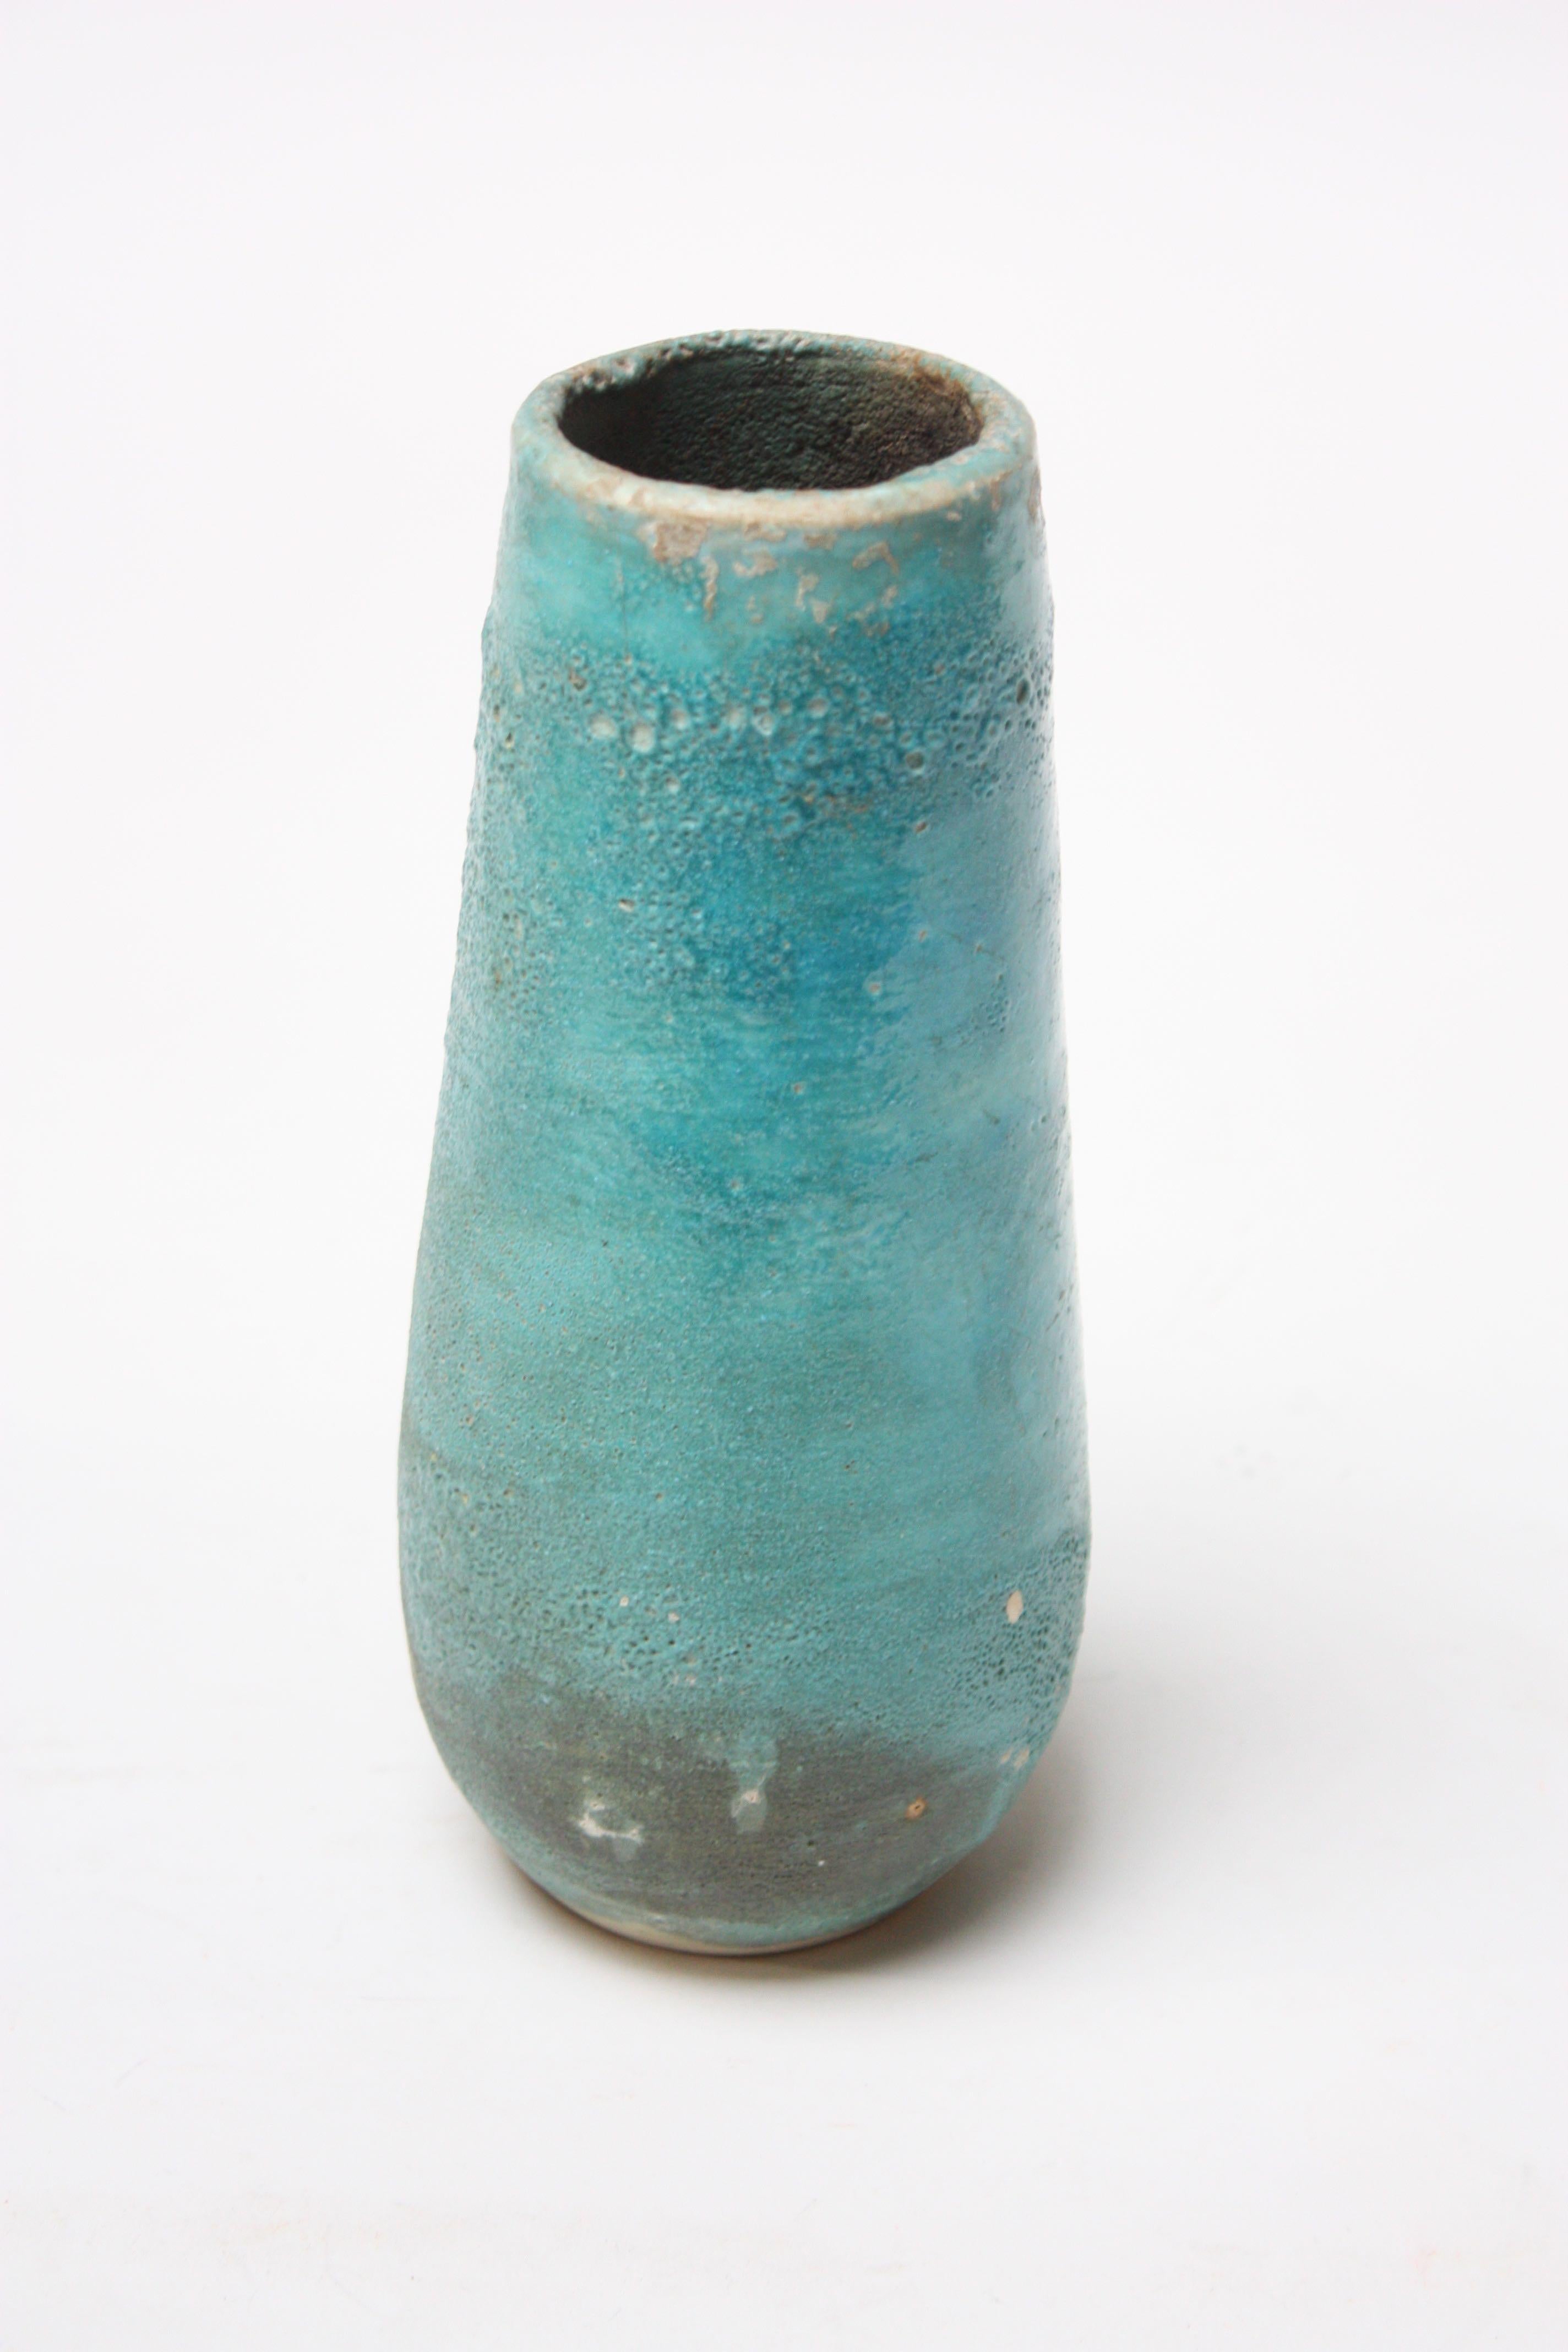 Small, intriguing Studio Pottery vase by Mark Keram in turquoise whose glaze has a volcanic-texture with bubbling throughout. Standard ink pen is used to illustrate scale. These is no loss / damage to the piece; the off-white applied speckling to